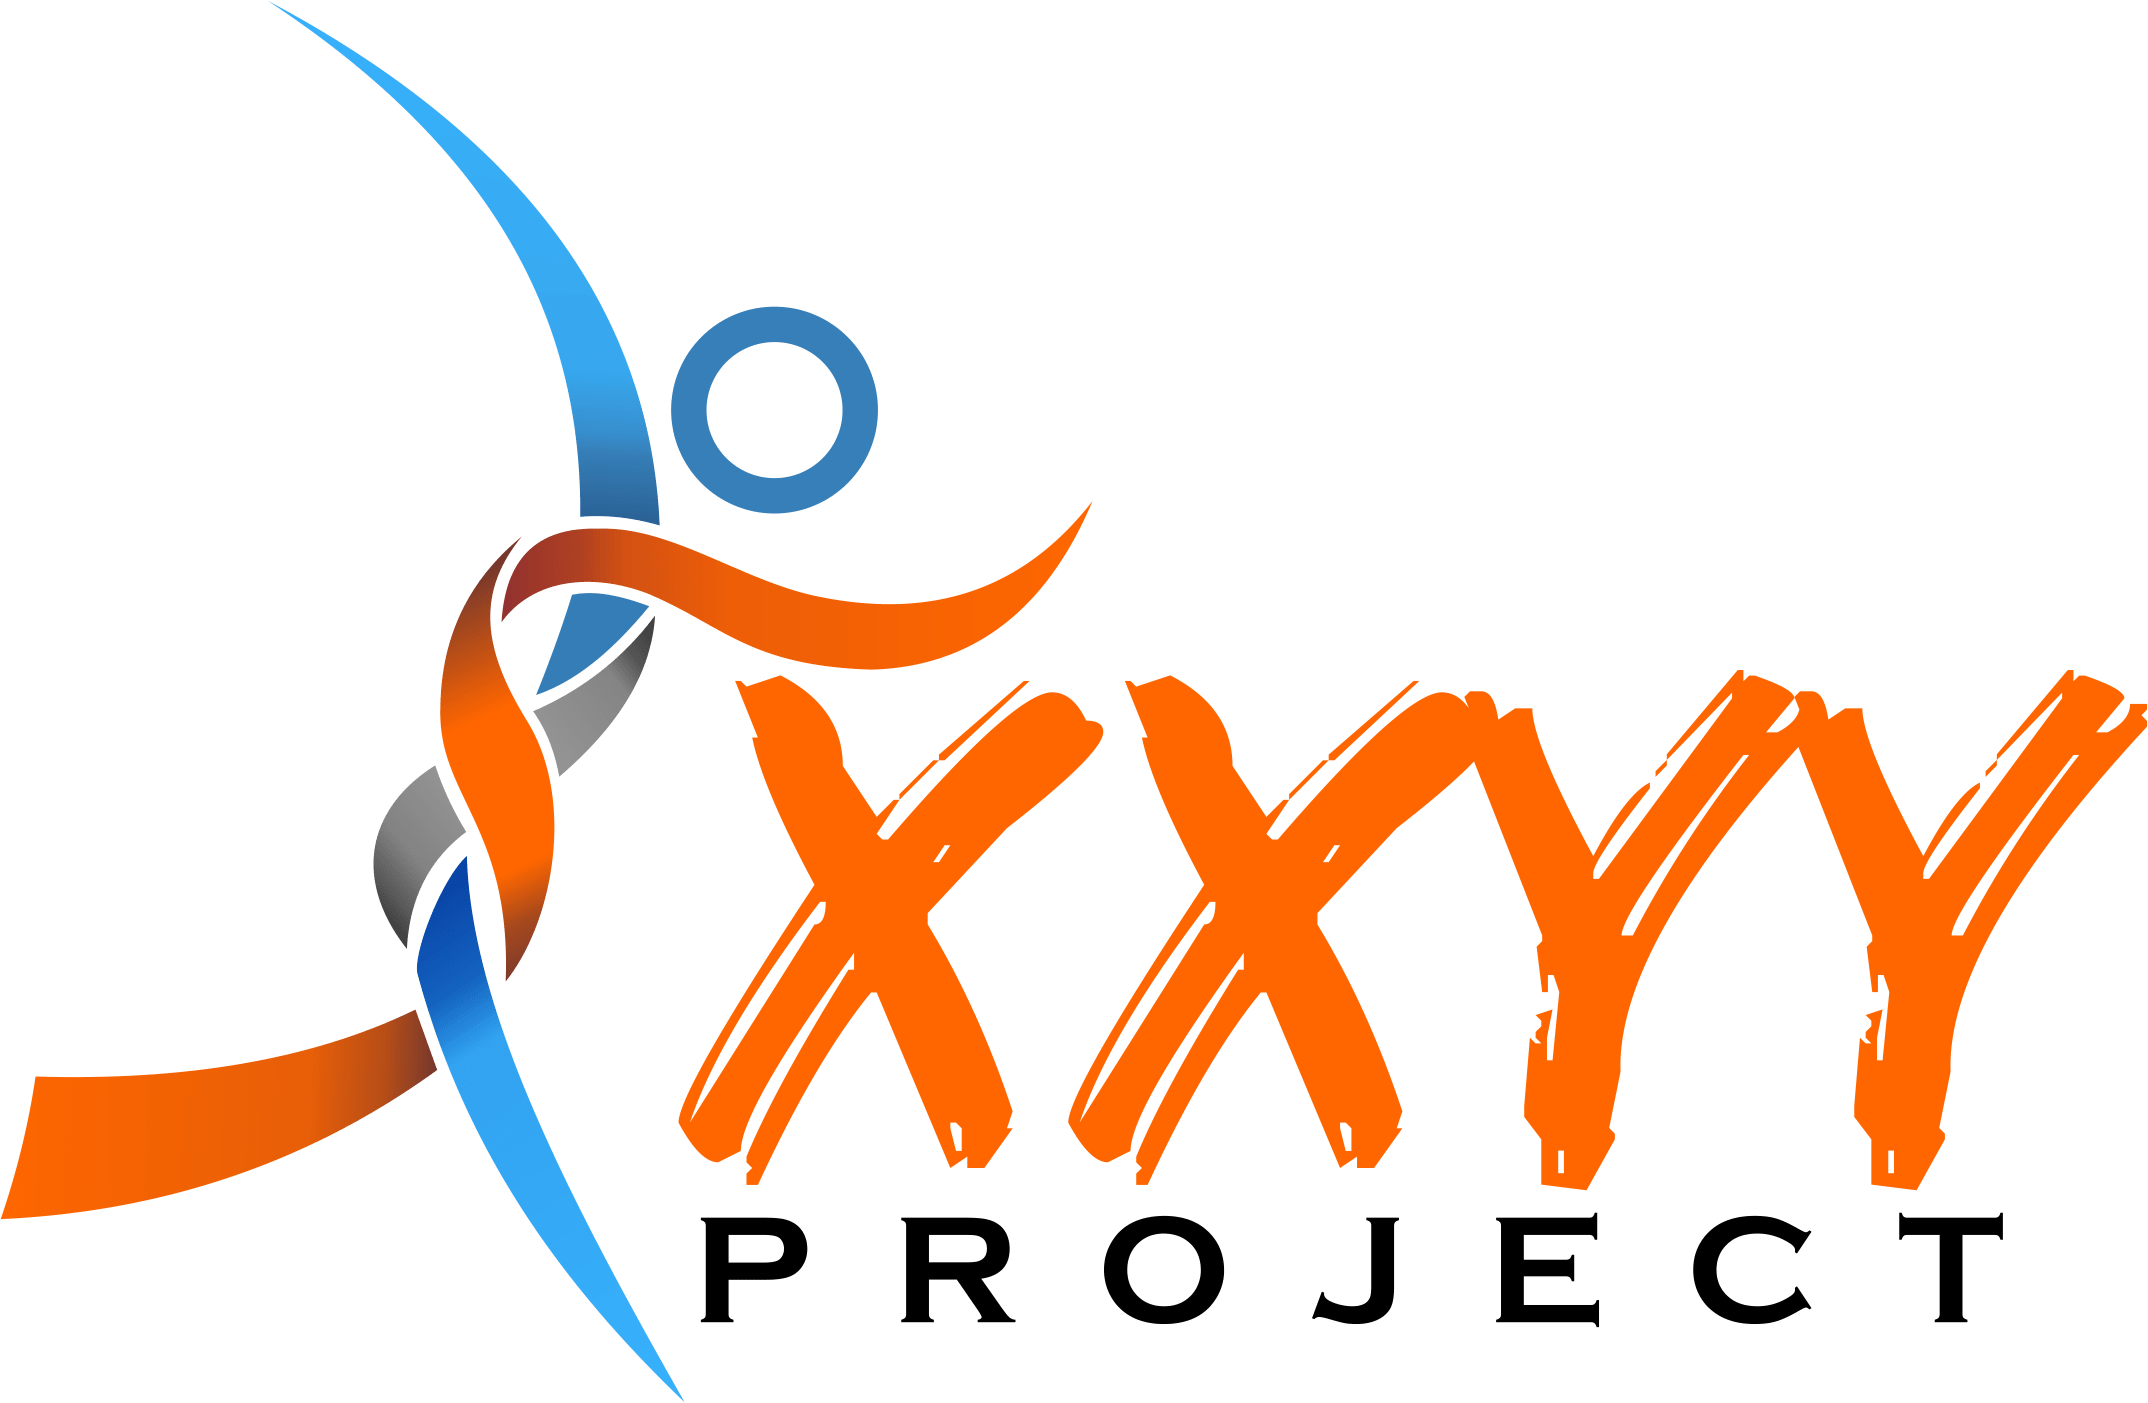 The XXYY Project